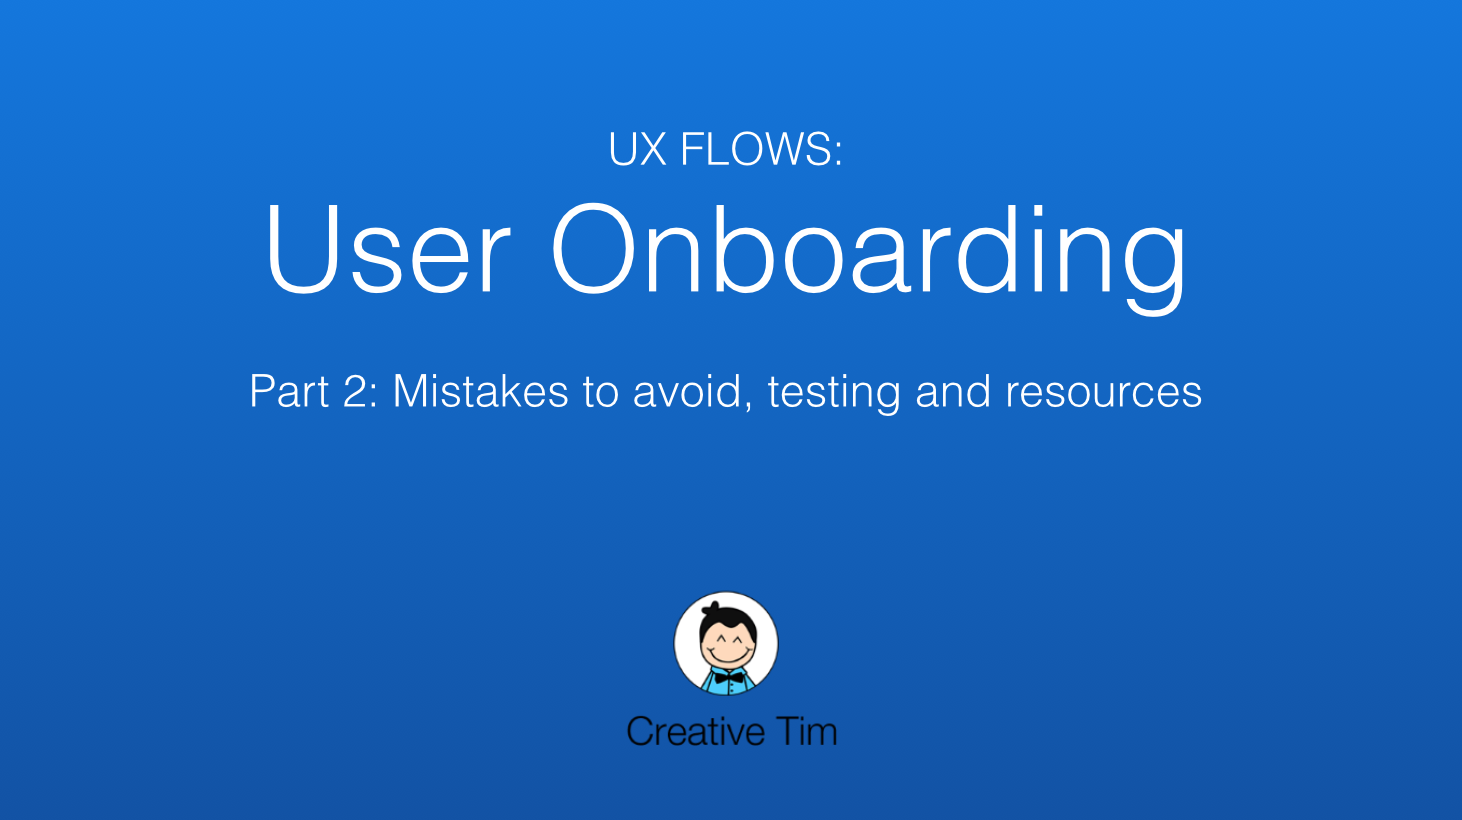 The Process of Onboarding Users - Mistakes to Avoid, Testing and Resources